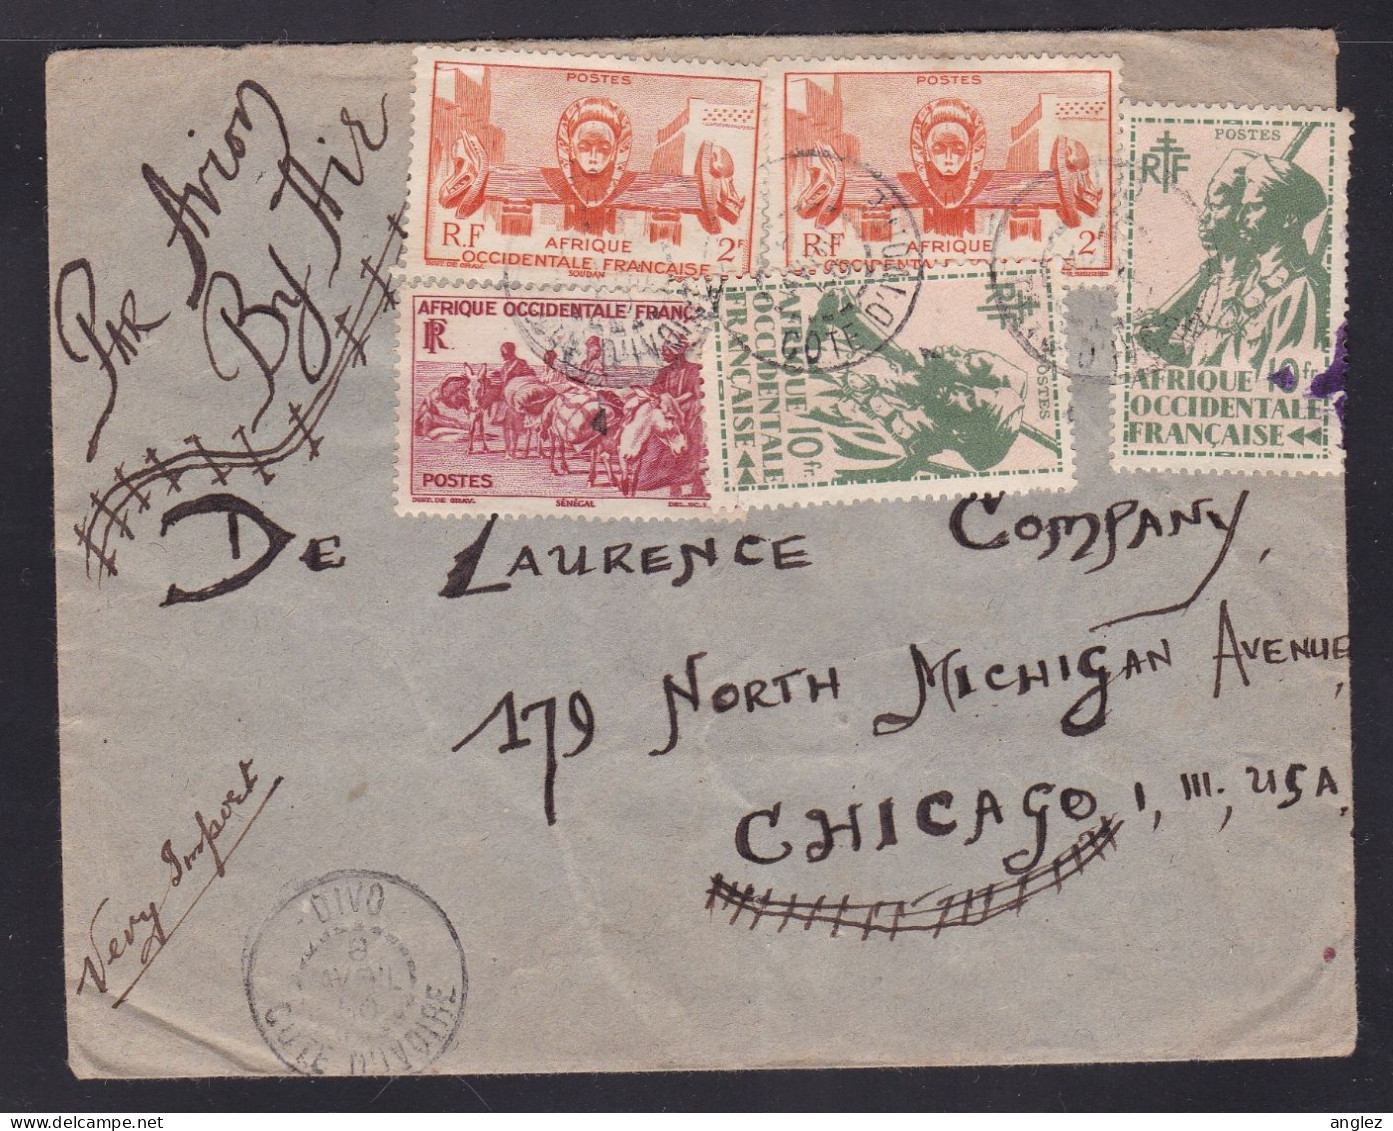 France / AOF / Cote D'Ivoire / Ivory Coast - 1950 Airmail Cover Divo To Chicago USA - Lettres & Documents